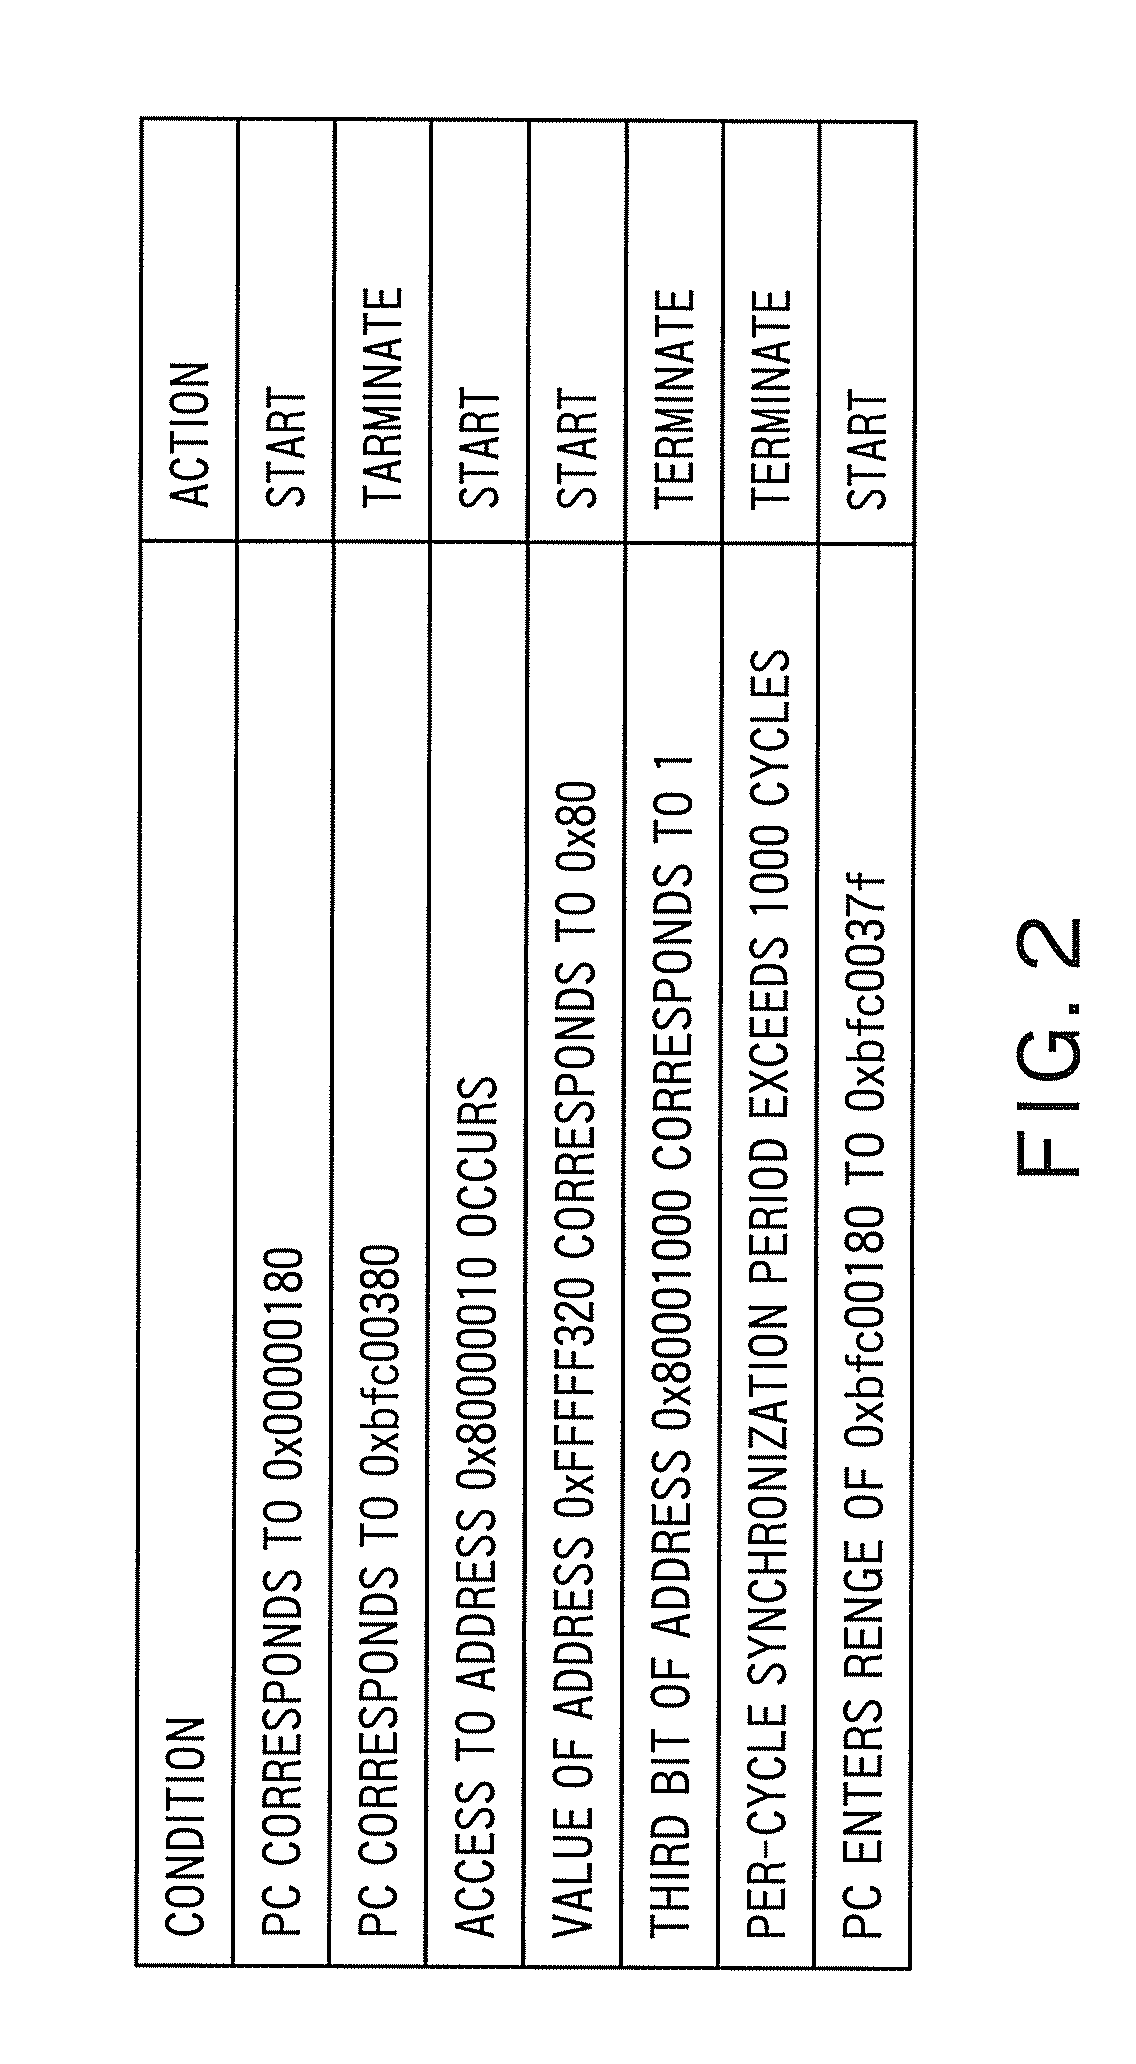 Software executing device and co-operation method